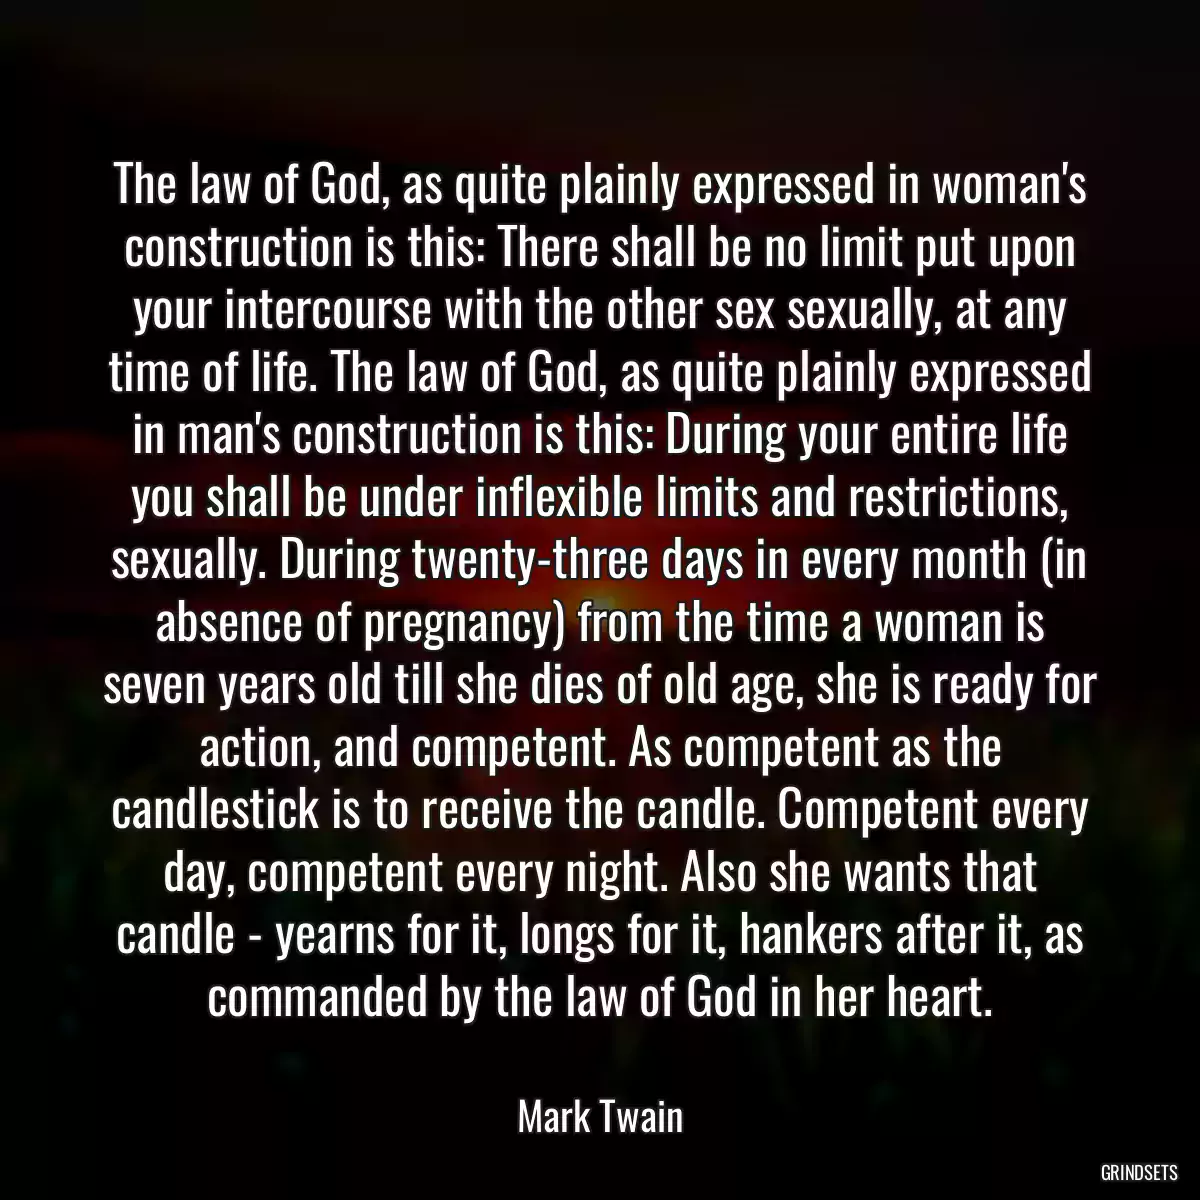 The law of God, as quite plainly expressed in woman\'s construction is this: There shall be no limit put upon your intercourse with the other sex sexually, at any time of life. The law of God, as quite plainly expressed in man\'s construction is this: During your entire life you shall be under inflexible limits and restrictions, sexually. During twenty-three days in every month (in absence of pregnancy) from the time a woman is seven years old till she dies of old age, she is ready for action, and competent. As competent as the candlestick is to receive the candle. Competent every day, competent every night. Also she wants that candle - yearns for it, longs for it, hankers after it, as commanded by the law of God in her heart.